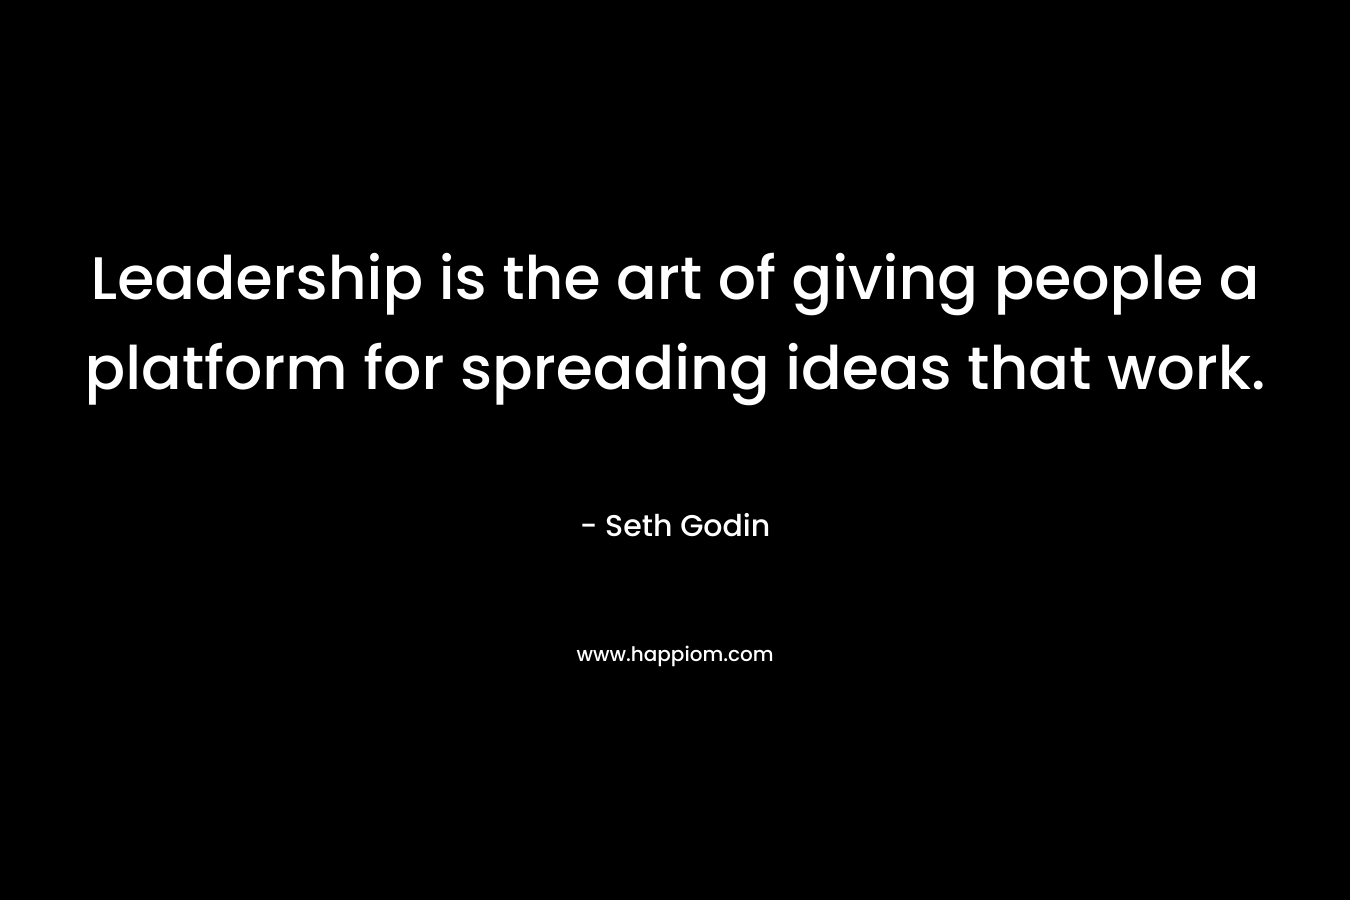 Leadership is the art of giving people a platform for spreading ideas that work. – Seth Godin